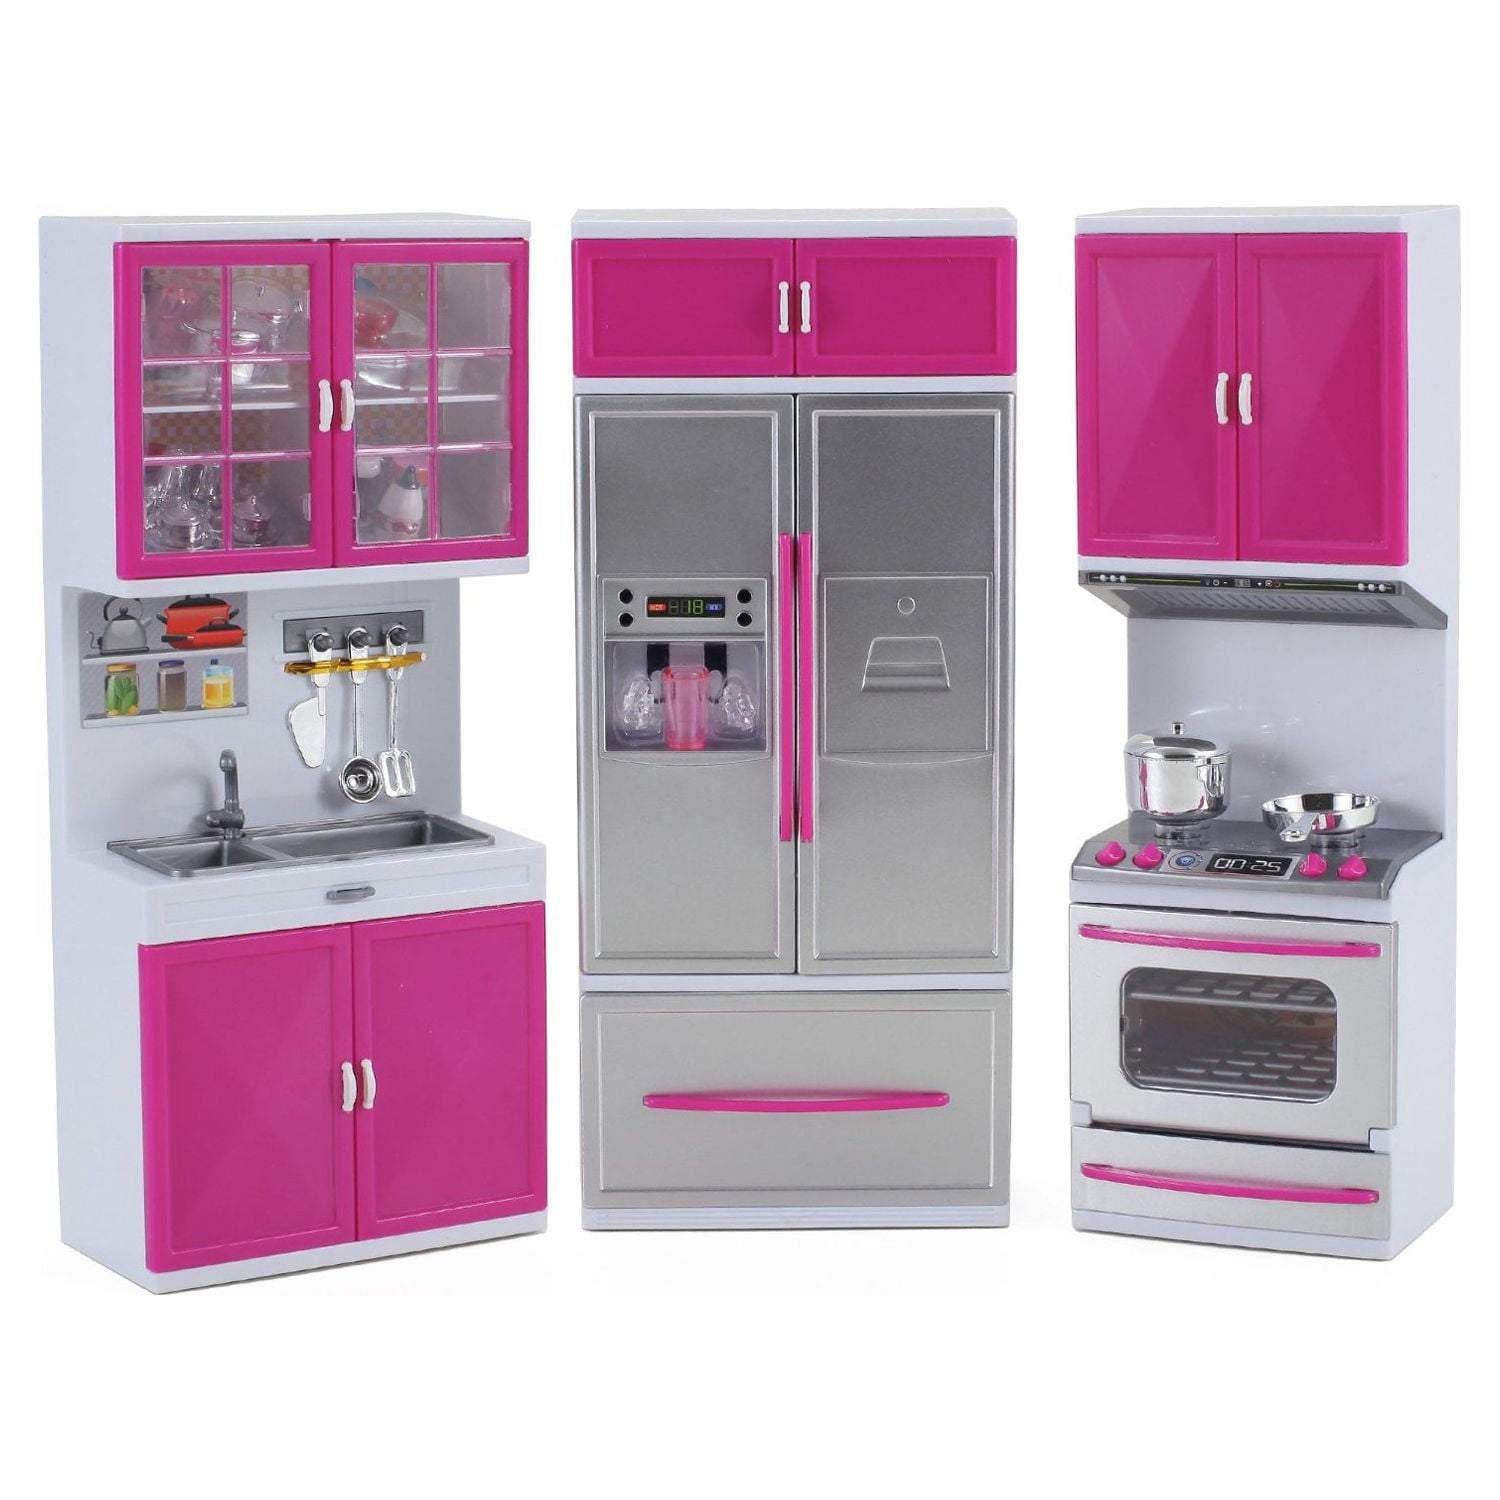 Dropship Modern Style Toy Kitchen Set For Boys& Girls 3+, Great